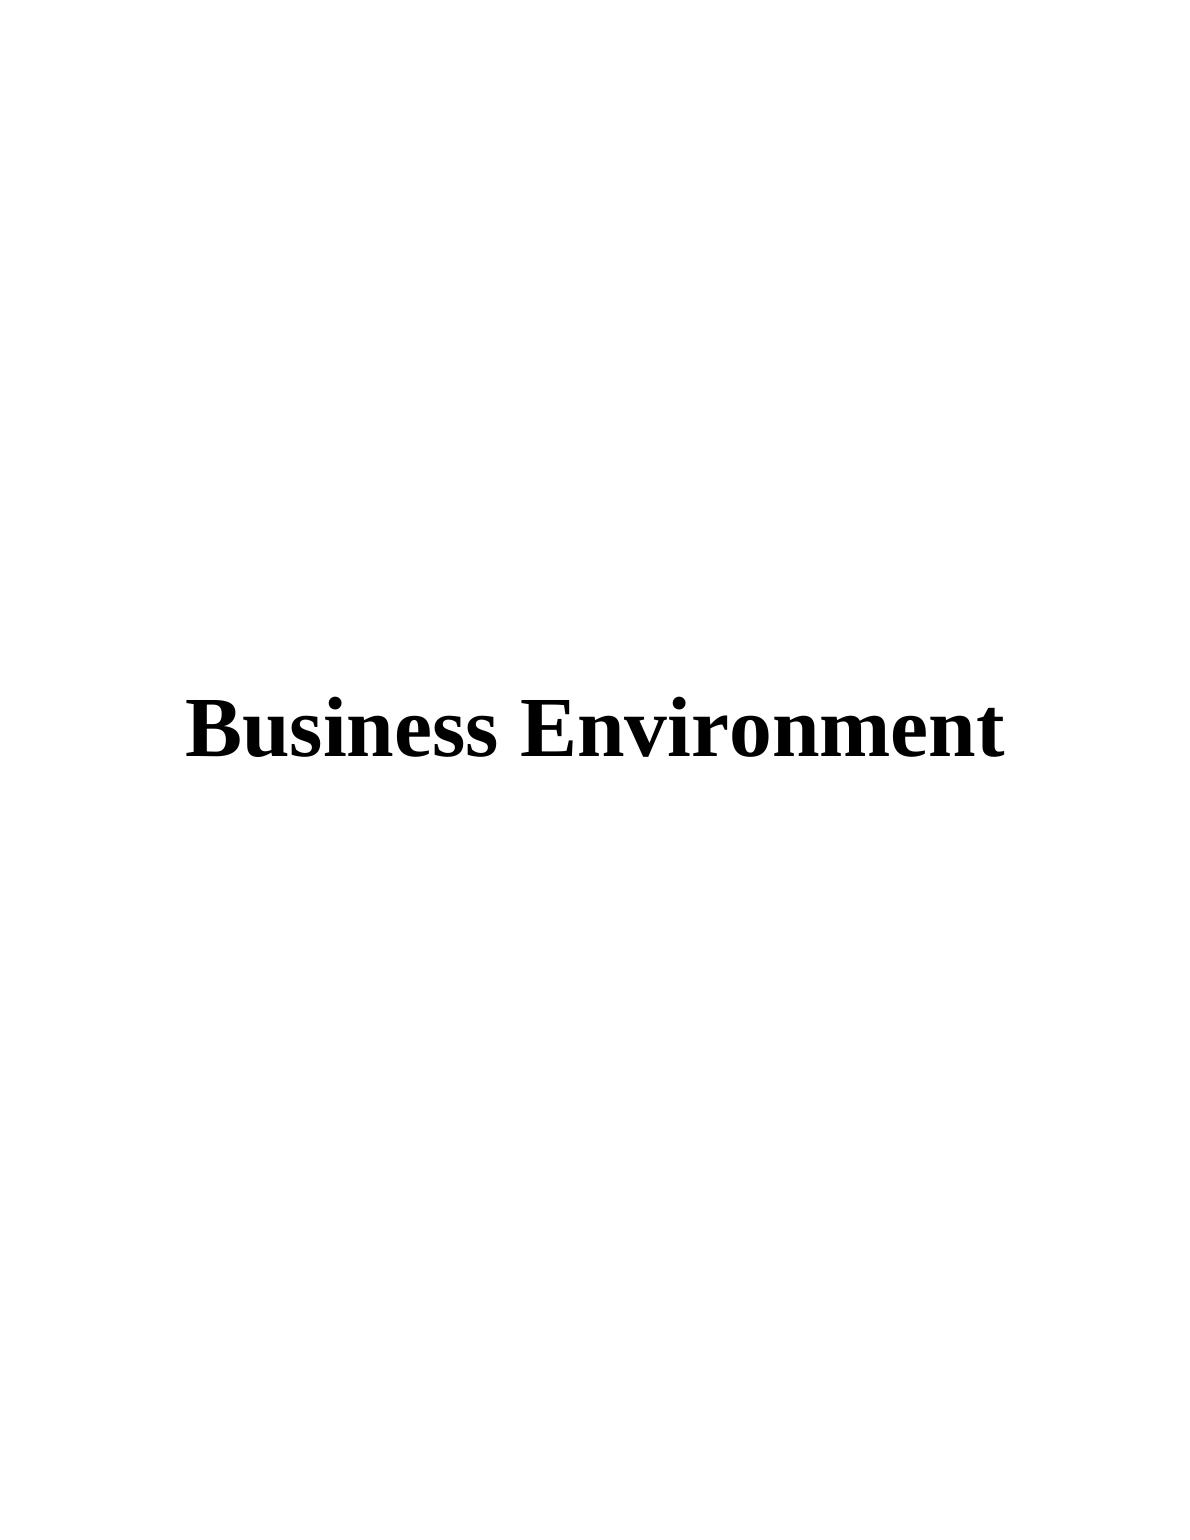 Business Environment - Urban industry_1